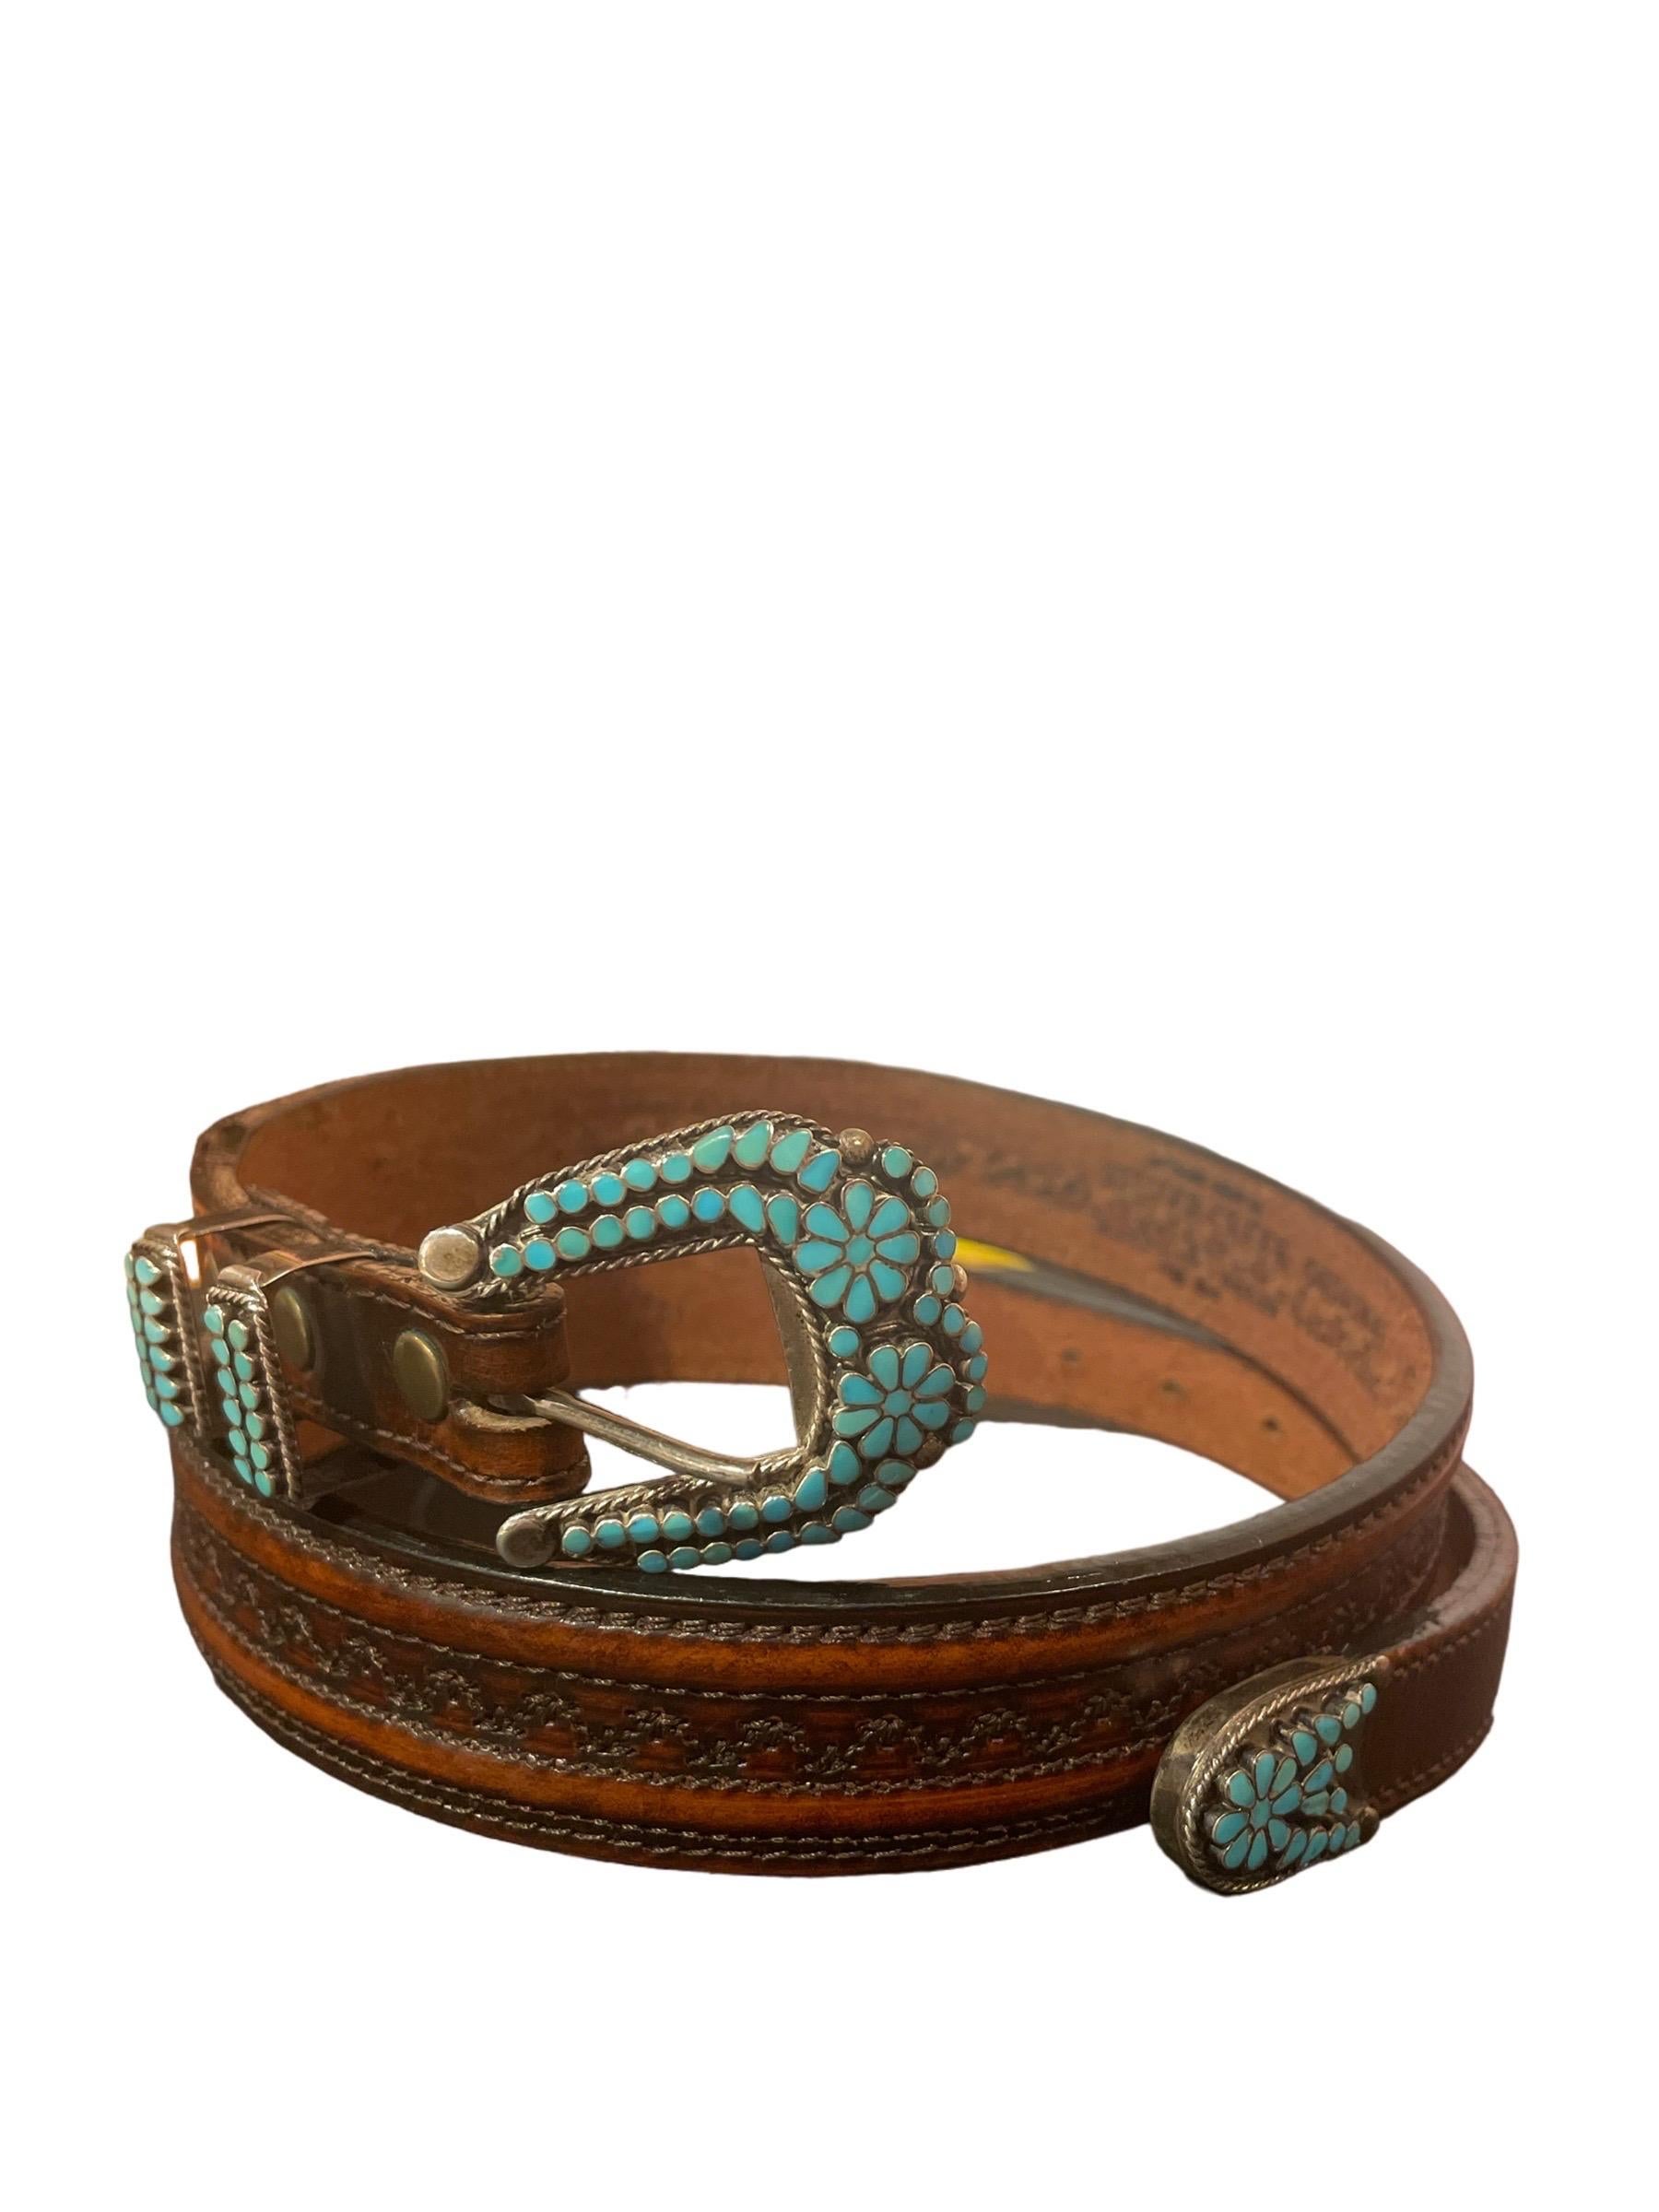 Stunning Vintage Native American Inlaid Turquoise, Silver & Hand-tooled Leather Belt 

Silver Creek Genuine leather stamped inside. Excellent condition! 

Size: 29”

Feel free to message us with any questions!